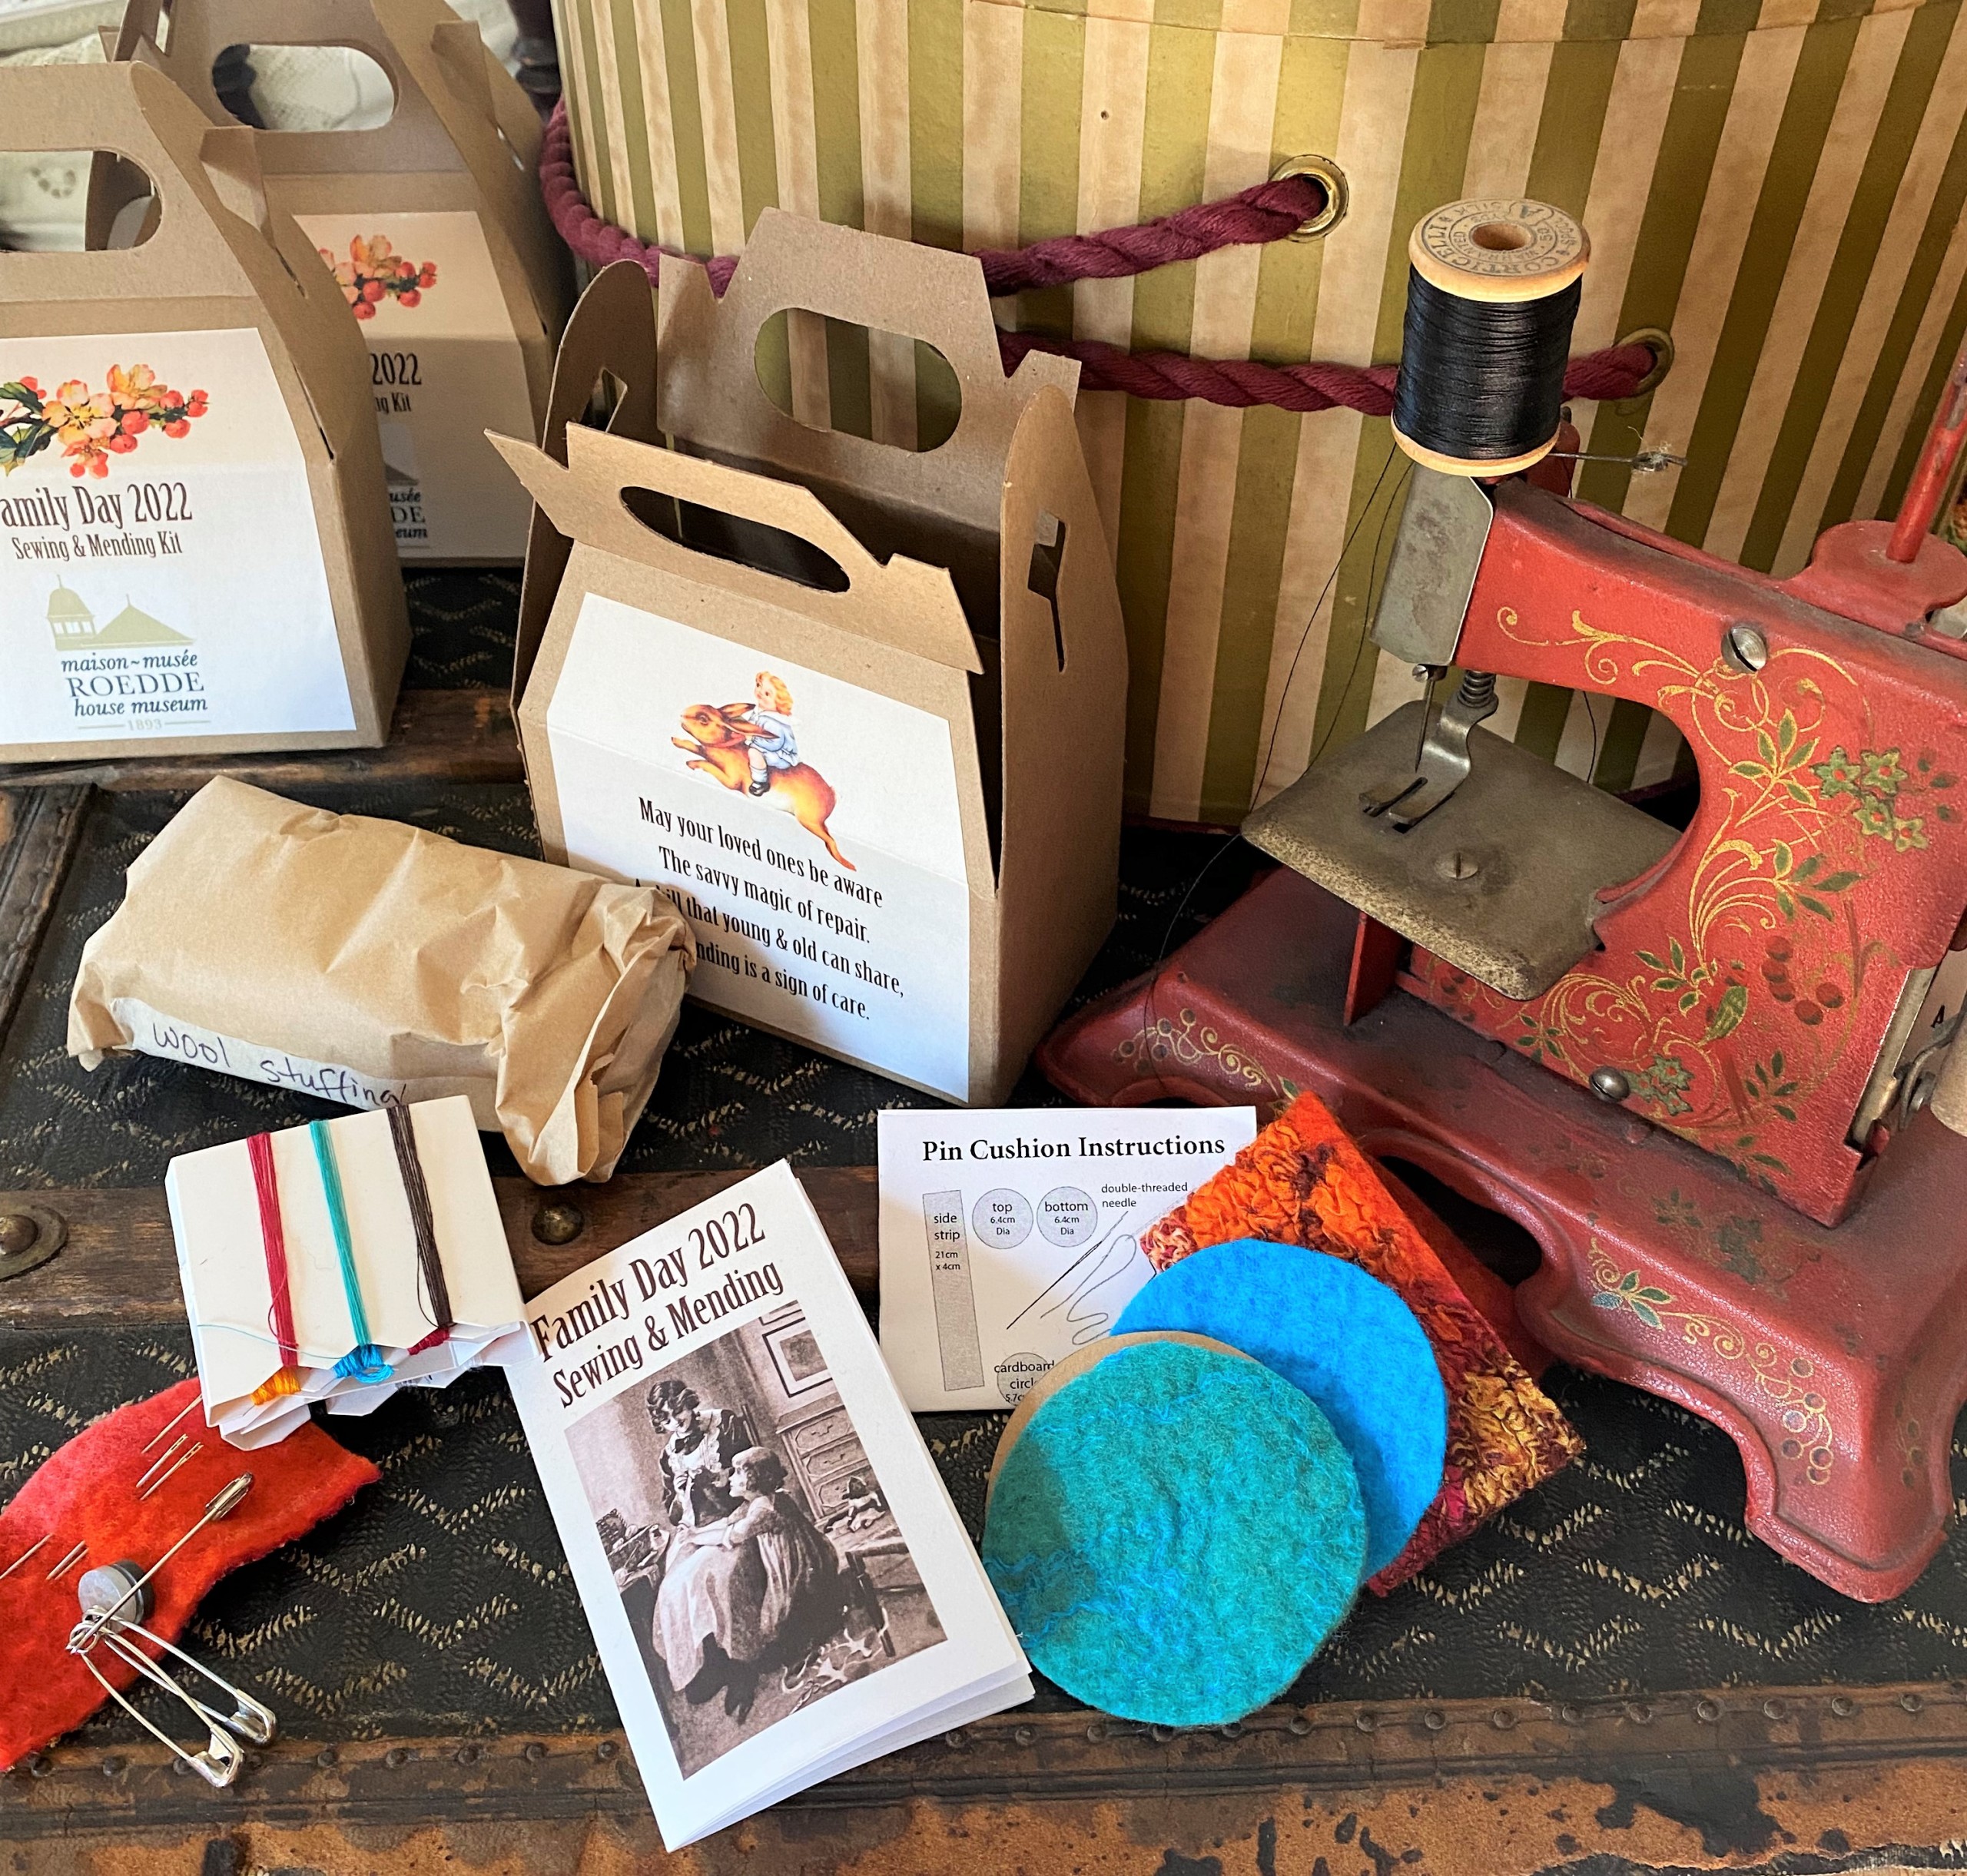 BC Family Day at Roedde House Museum: Online Sewing Workshop Kit photo